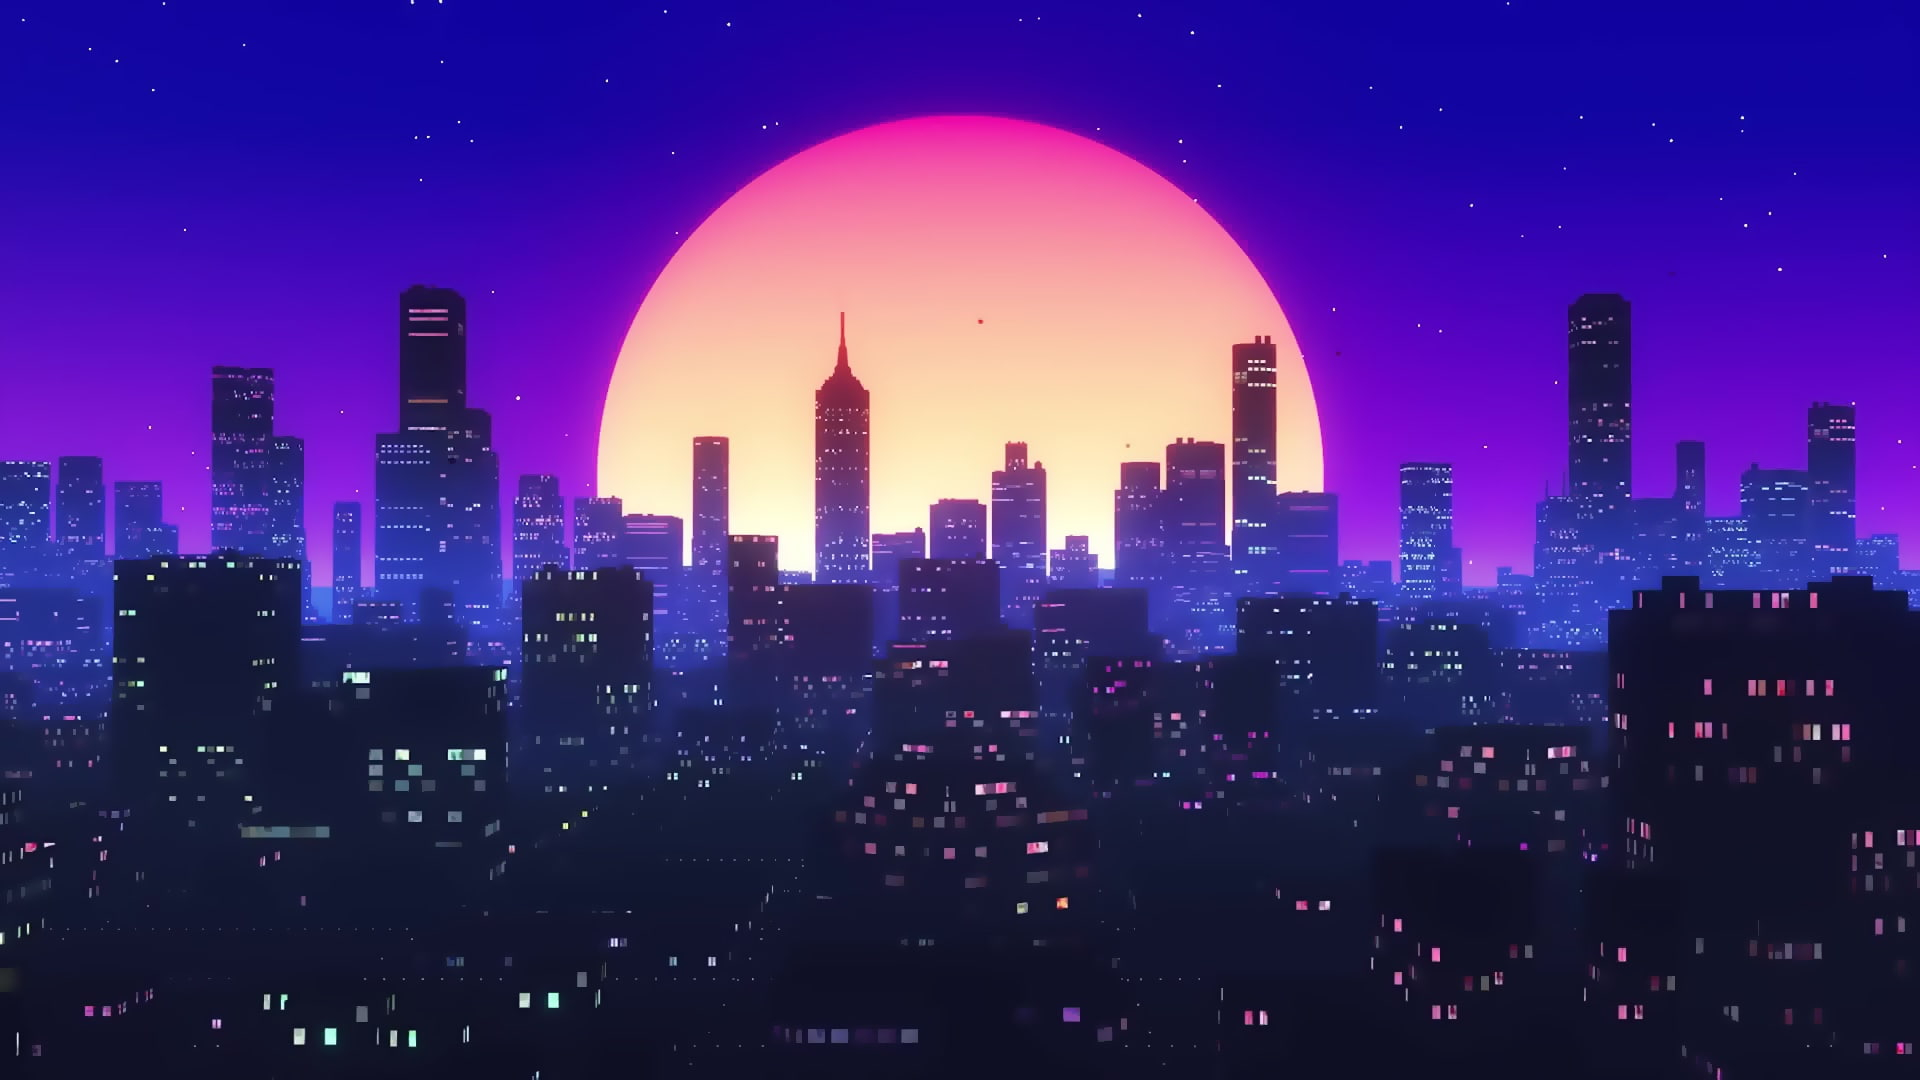 The sun, Night, Music, The city, Background, 80s wallpaper, 80's, Synth